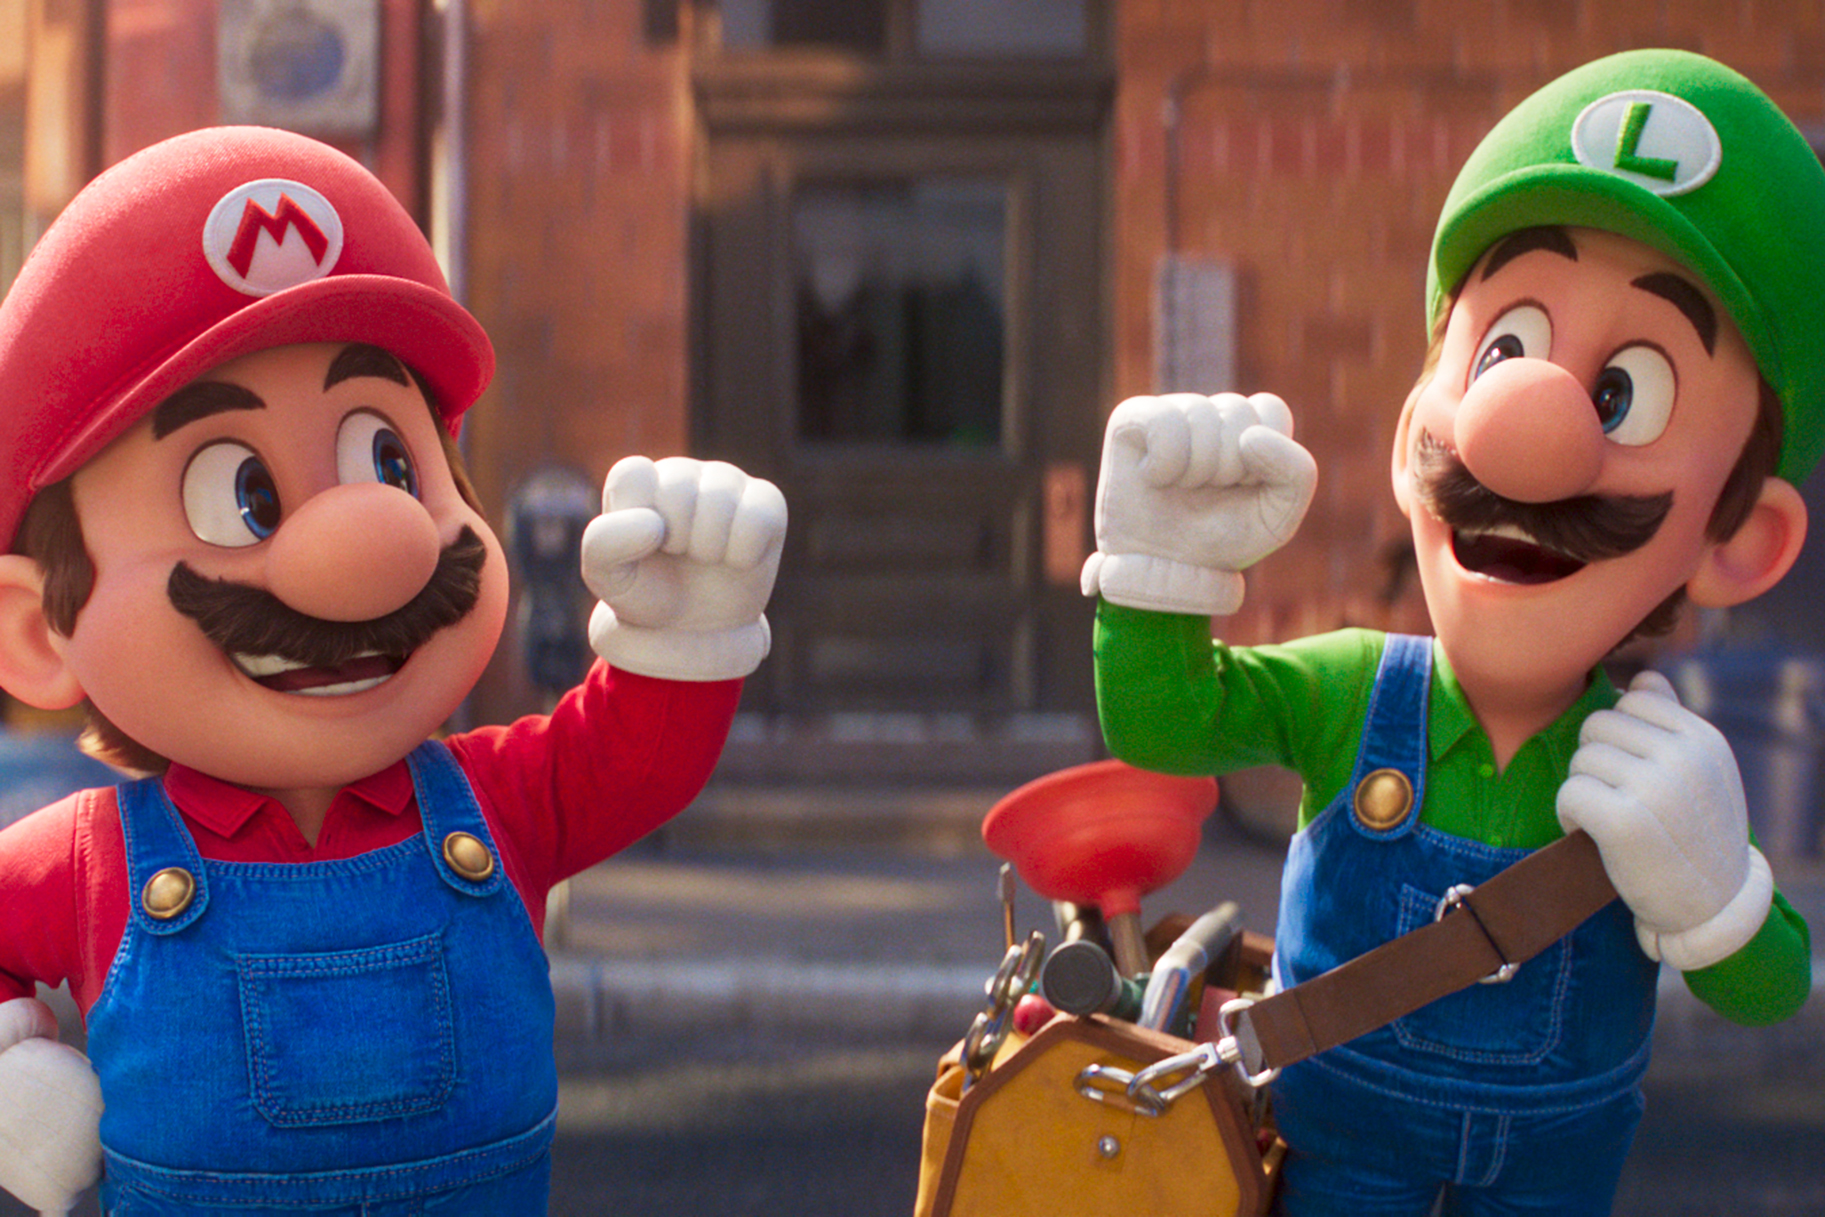 Are Mario And Luigi Real Brothers? Mario Bros. Names Explained